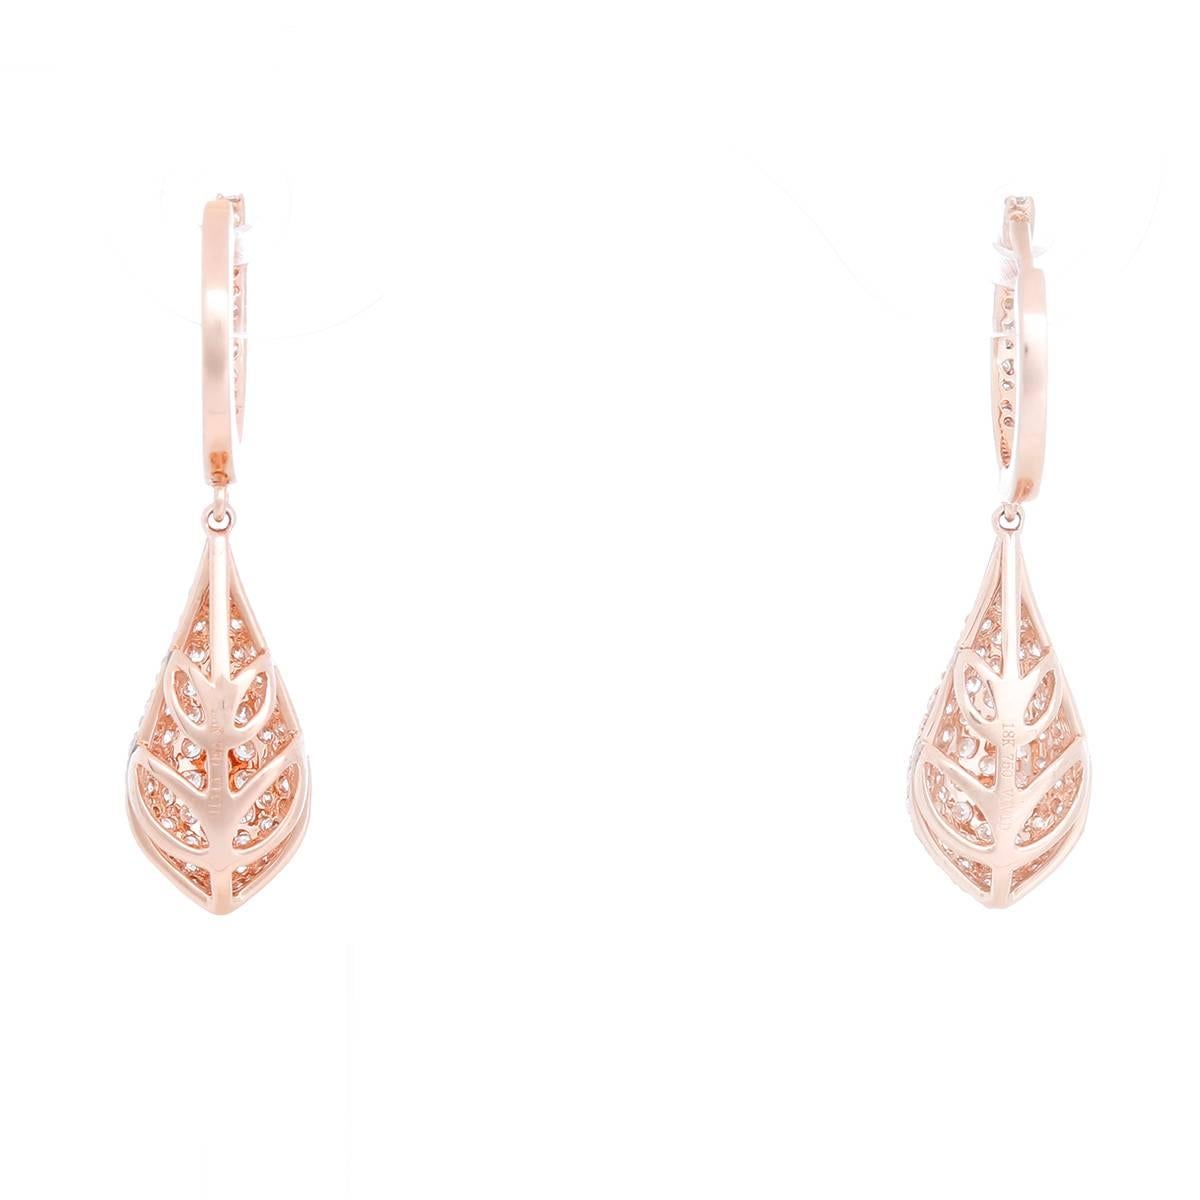 These amazing pave-set 1.39 ctw. diamond teardrop earrings are set in 18k rose gold. Earrings measure apx. 1-1/4 inches in length. Total weight is 3.7 grams.